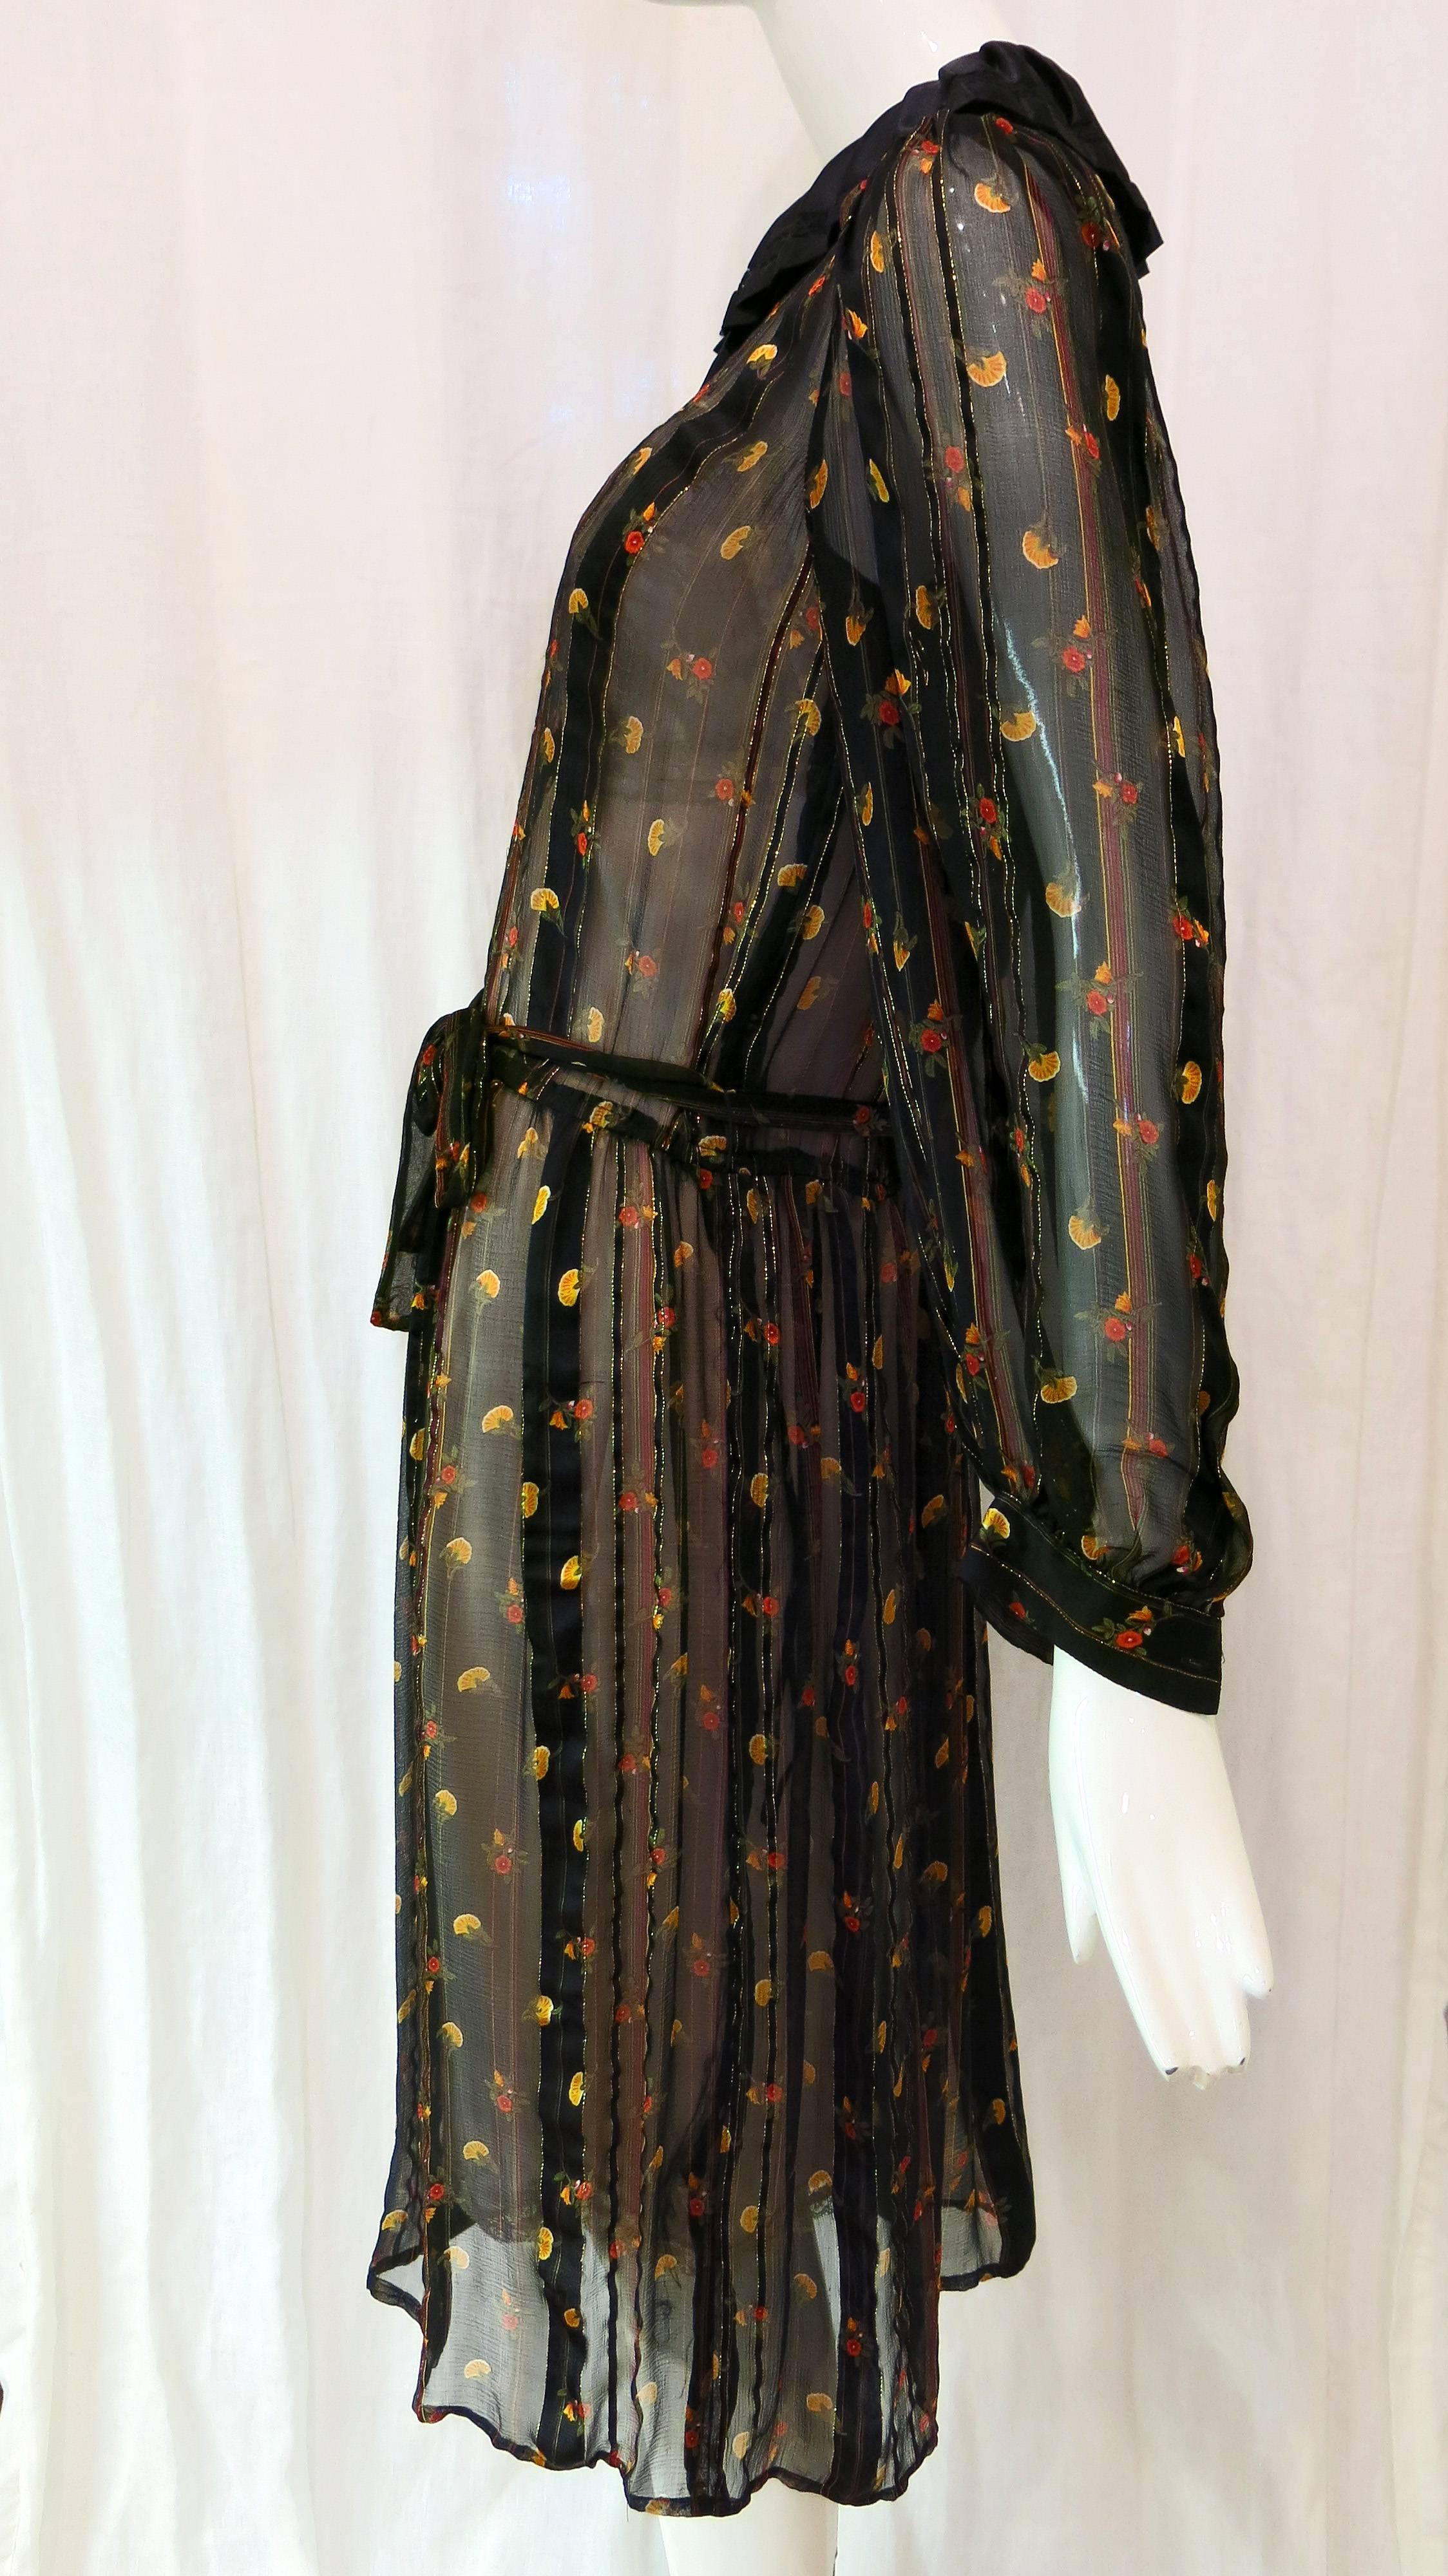 Black sheer floral button down dress. Belts at waist where buttons end. Elaborate pleated collar with ribbon bow. Five covered buttons to waist. Metallic gold stripes throughout. Buttons at cuffs. Dress hits at the knee. 

Jack Mulqueen was known as